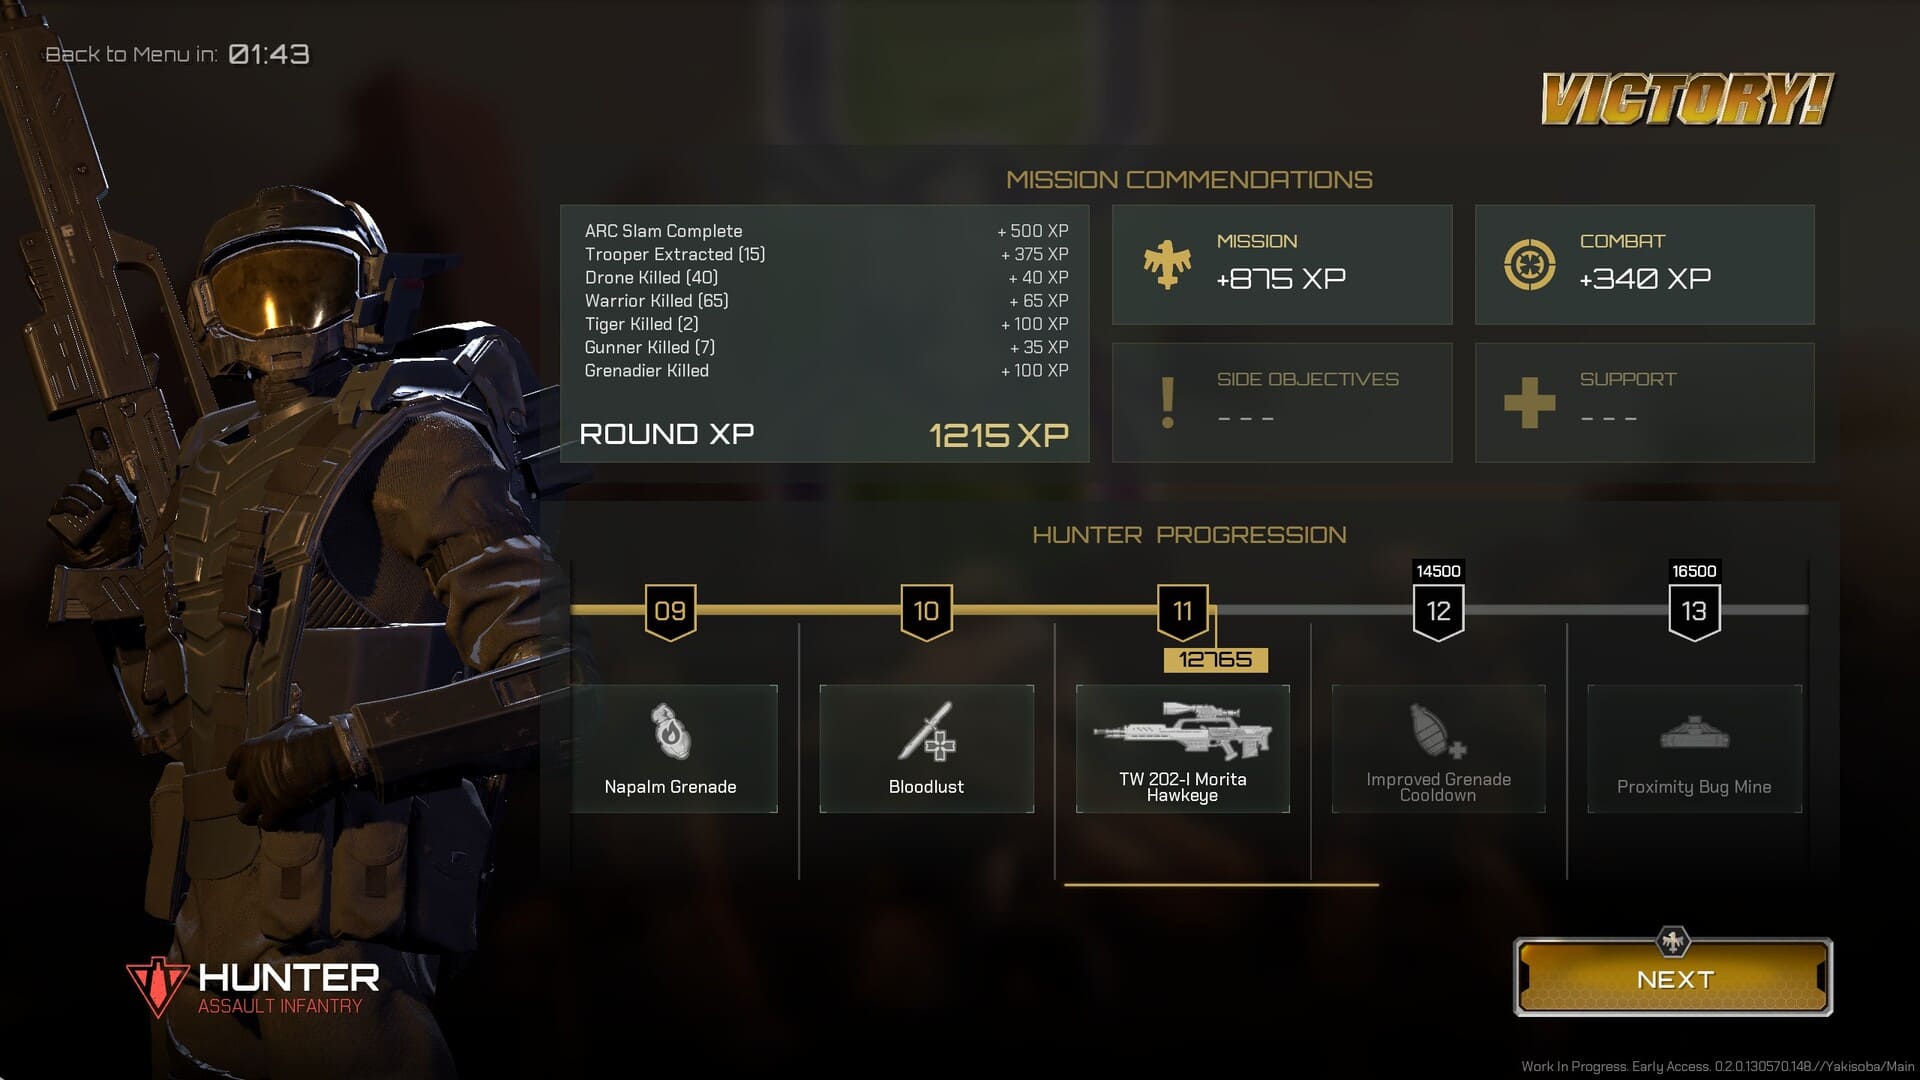 Image of the victory level up screen in Starship Troopers Extinction